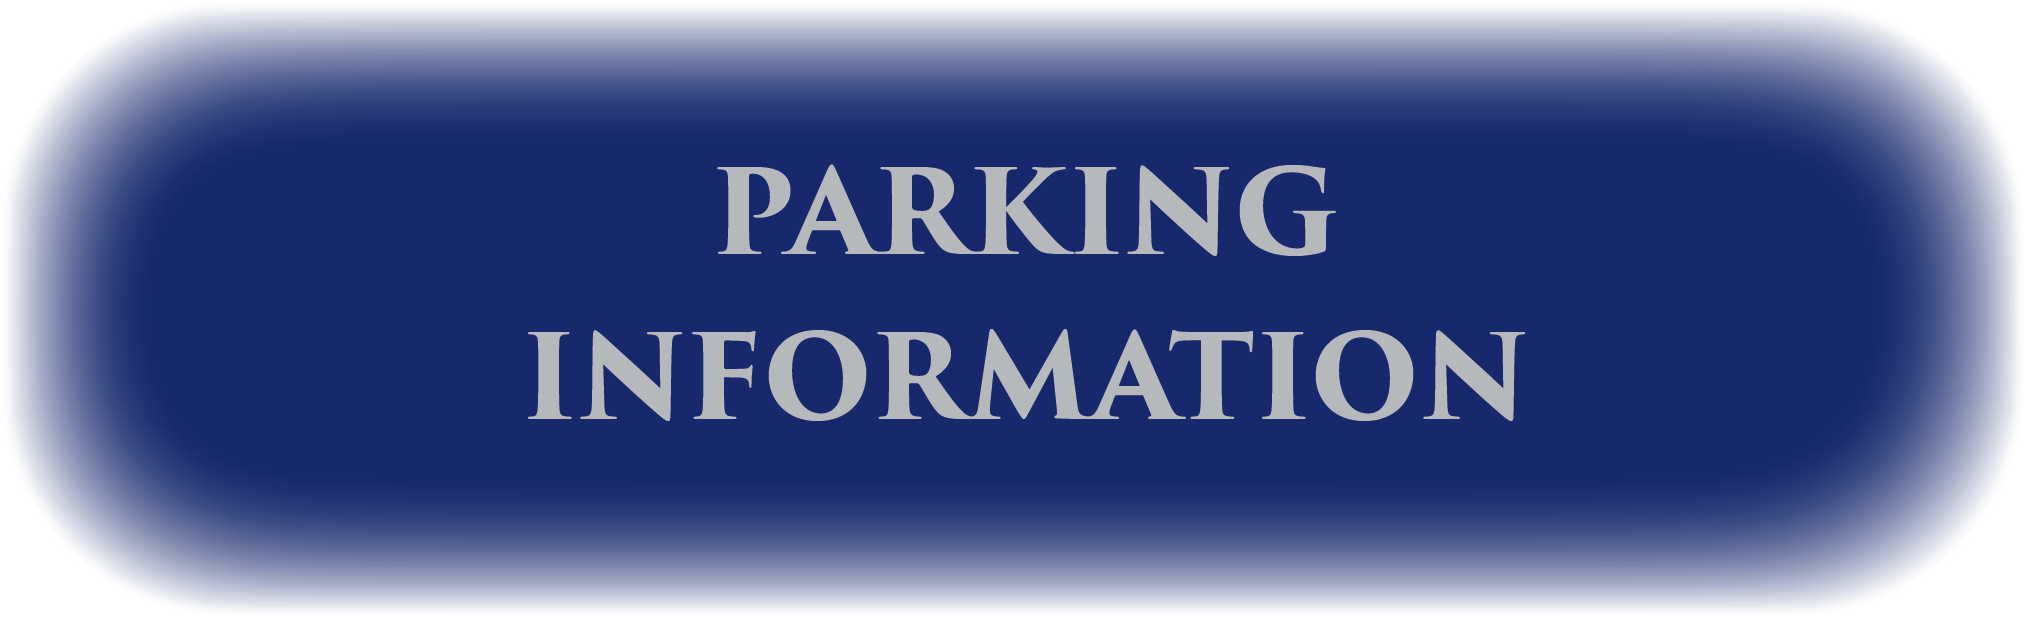 Click here for parking information